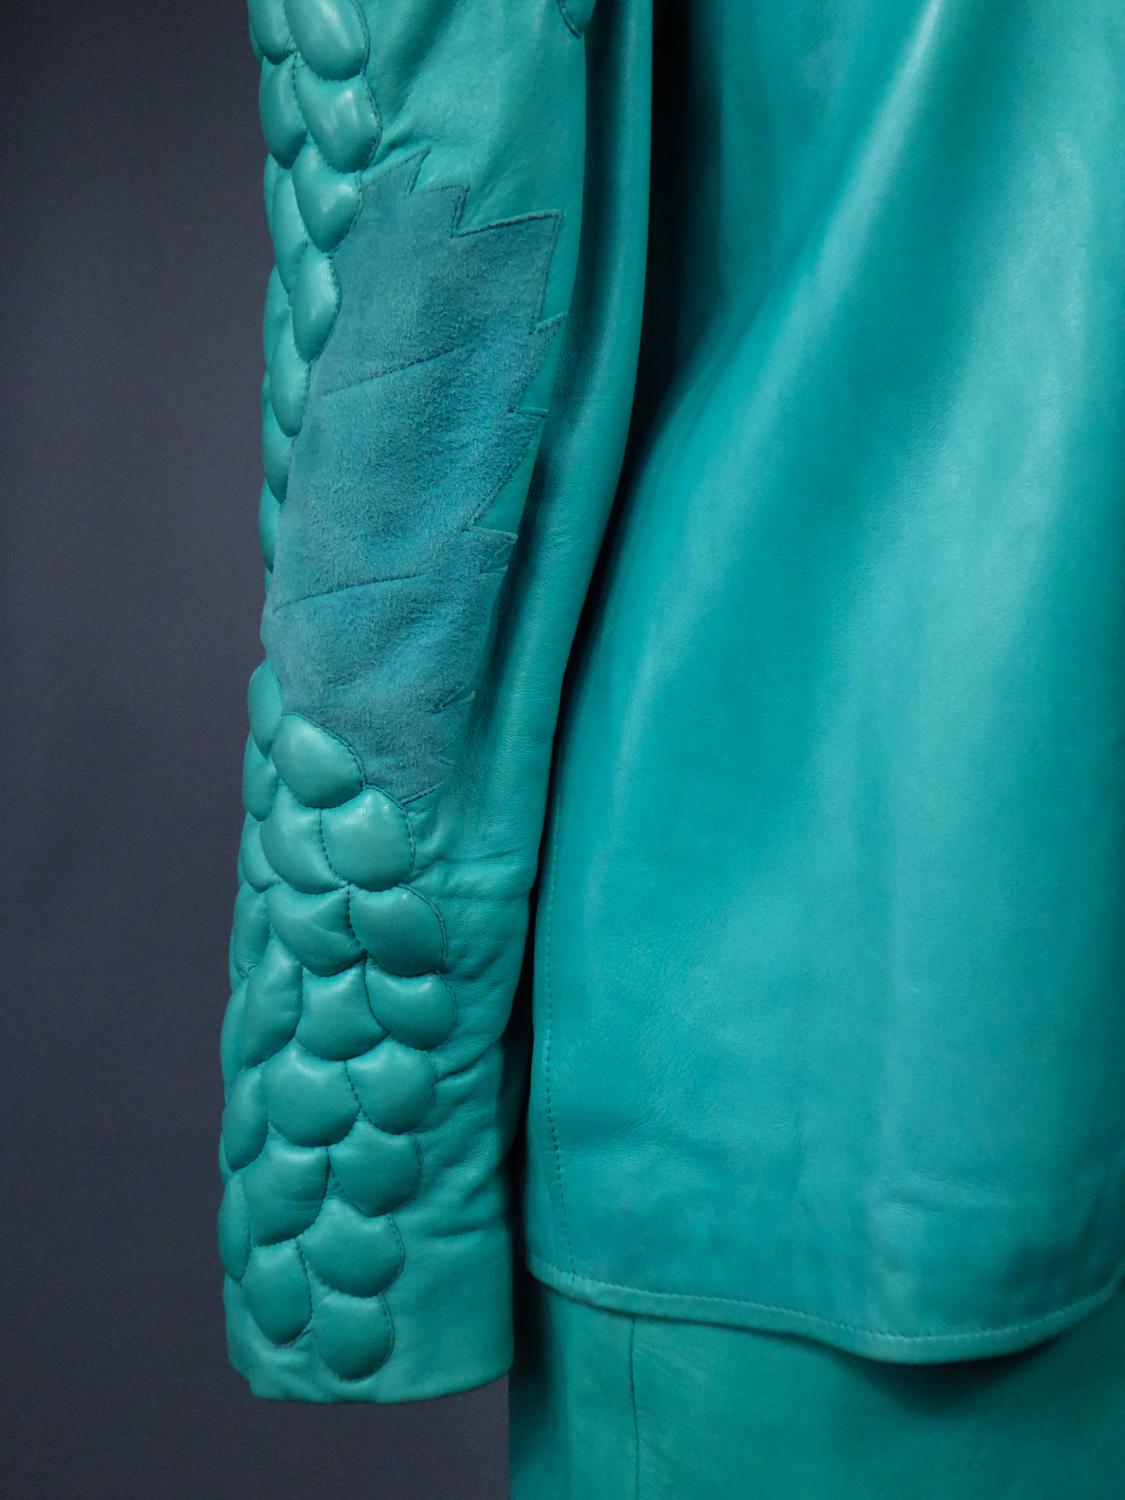 A Jean-Claude Jitrois Skirt and Jacket in Turquoise Leather - Fall 1985/1986  For Sale 4